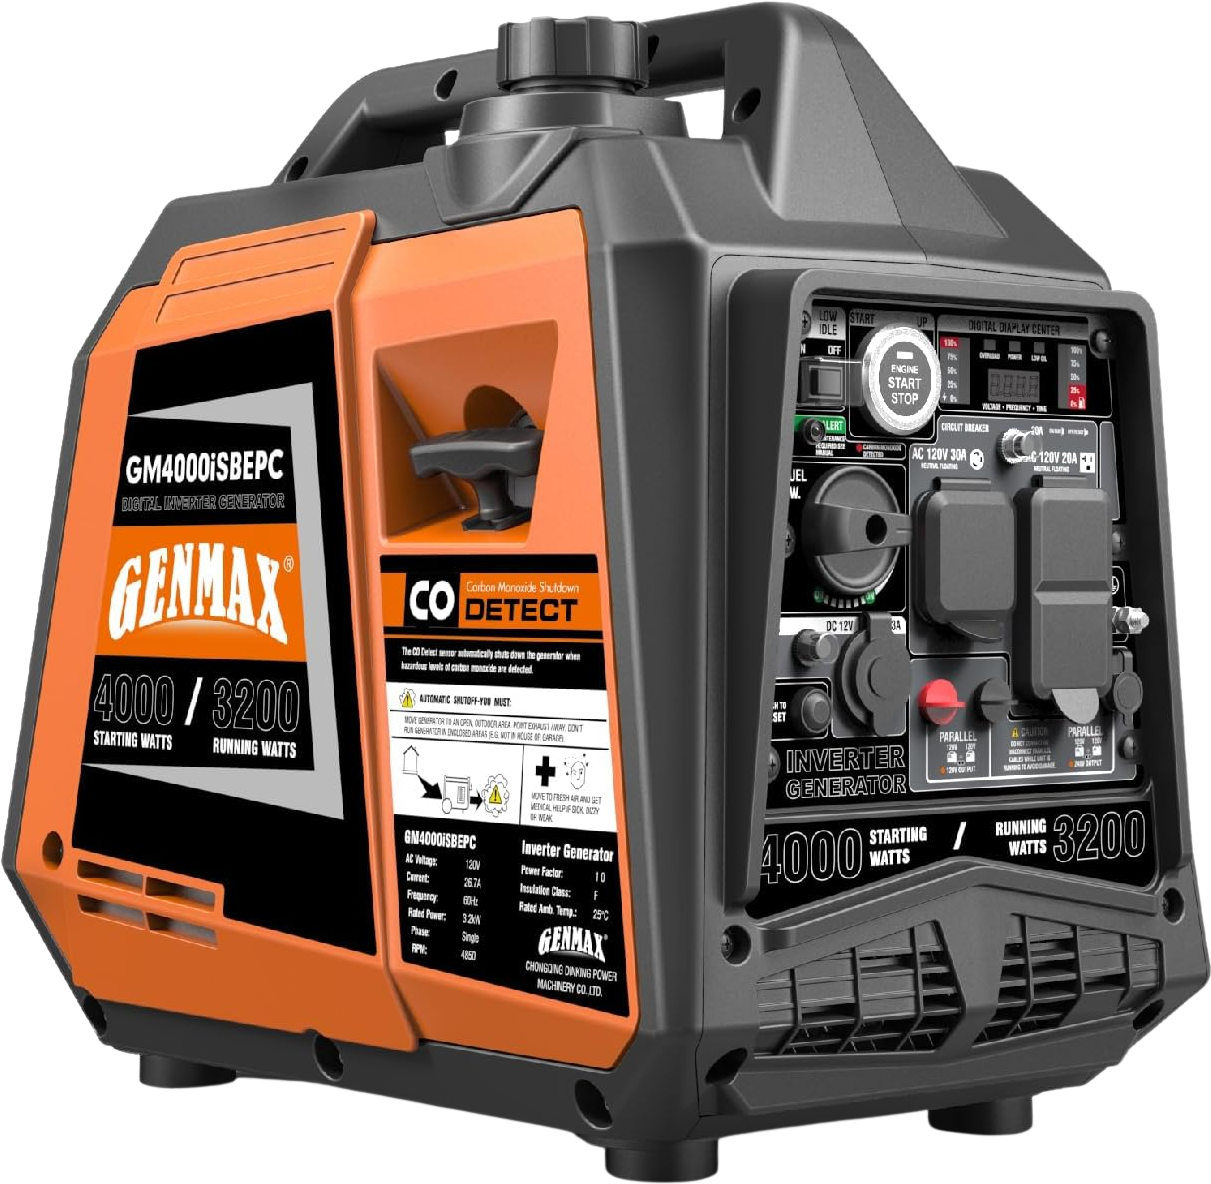 GENMAX, GENMAX GM4000iSBEPC 3200W/4000W 26.7 Amp Electric Start Gas Inverter Generator Parallel Ready with CO Detect New